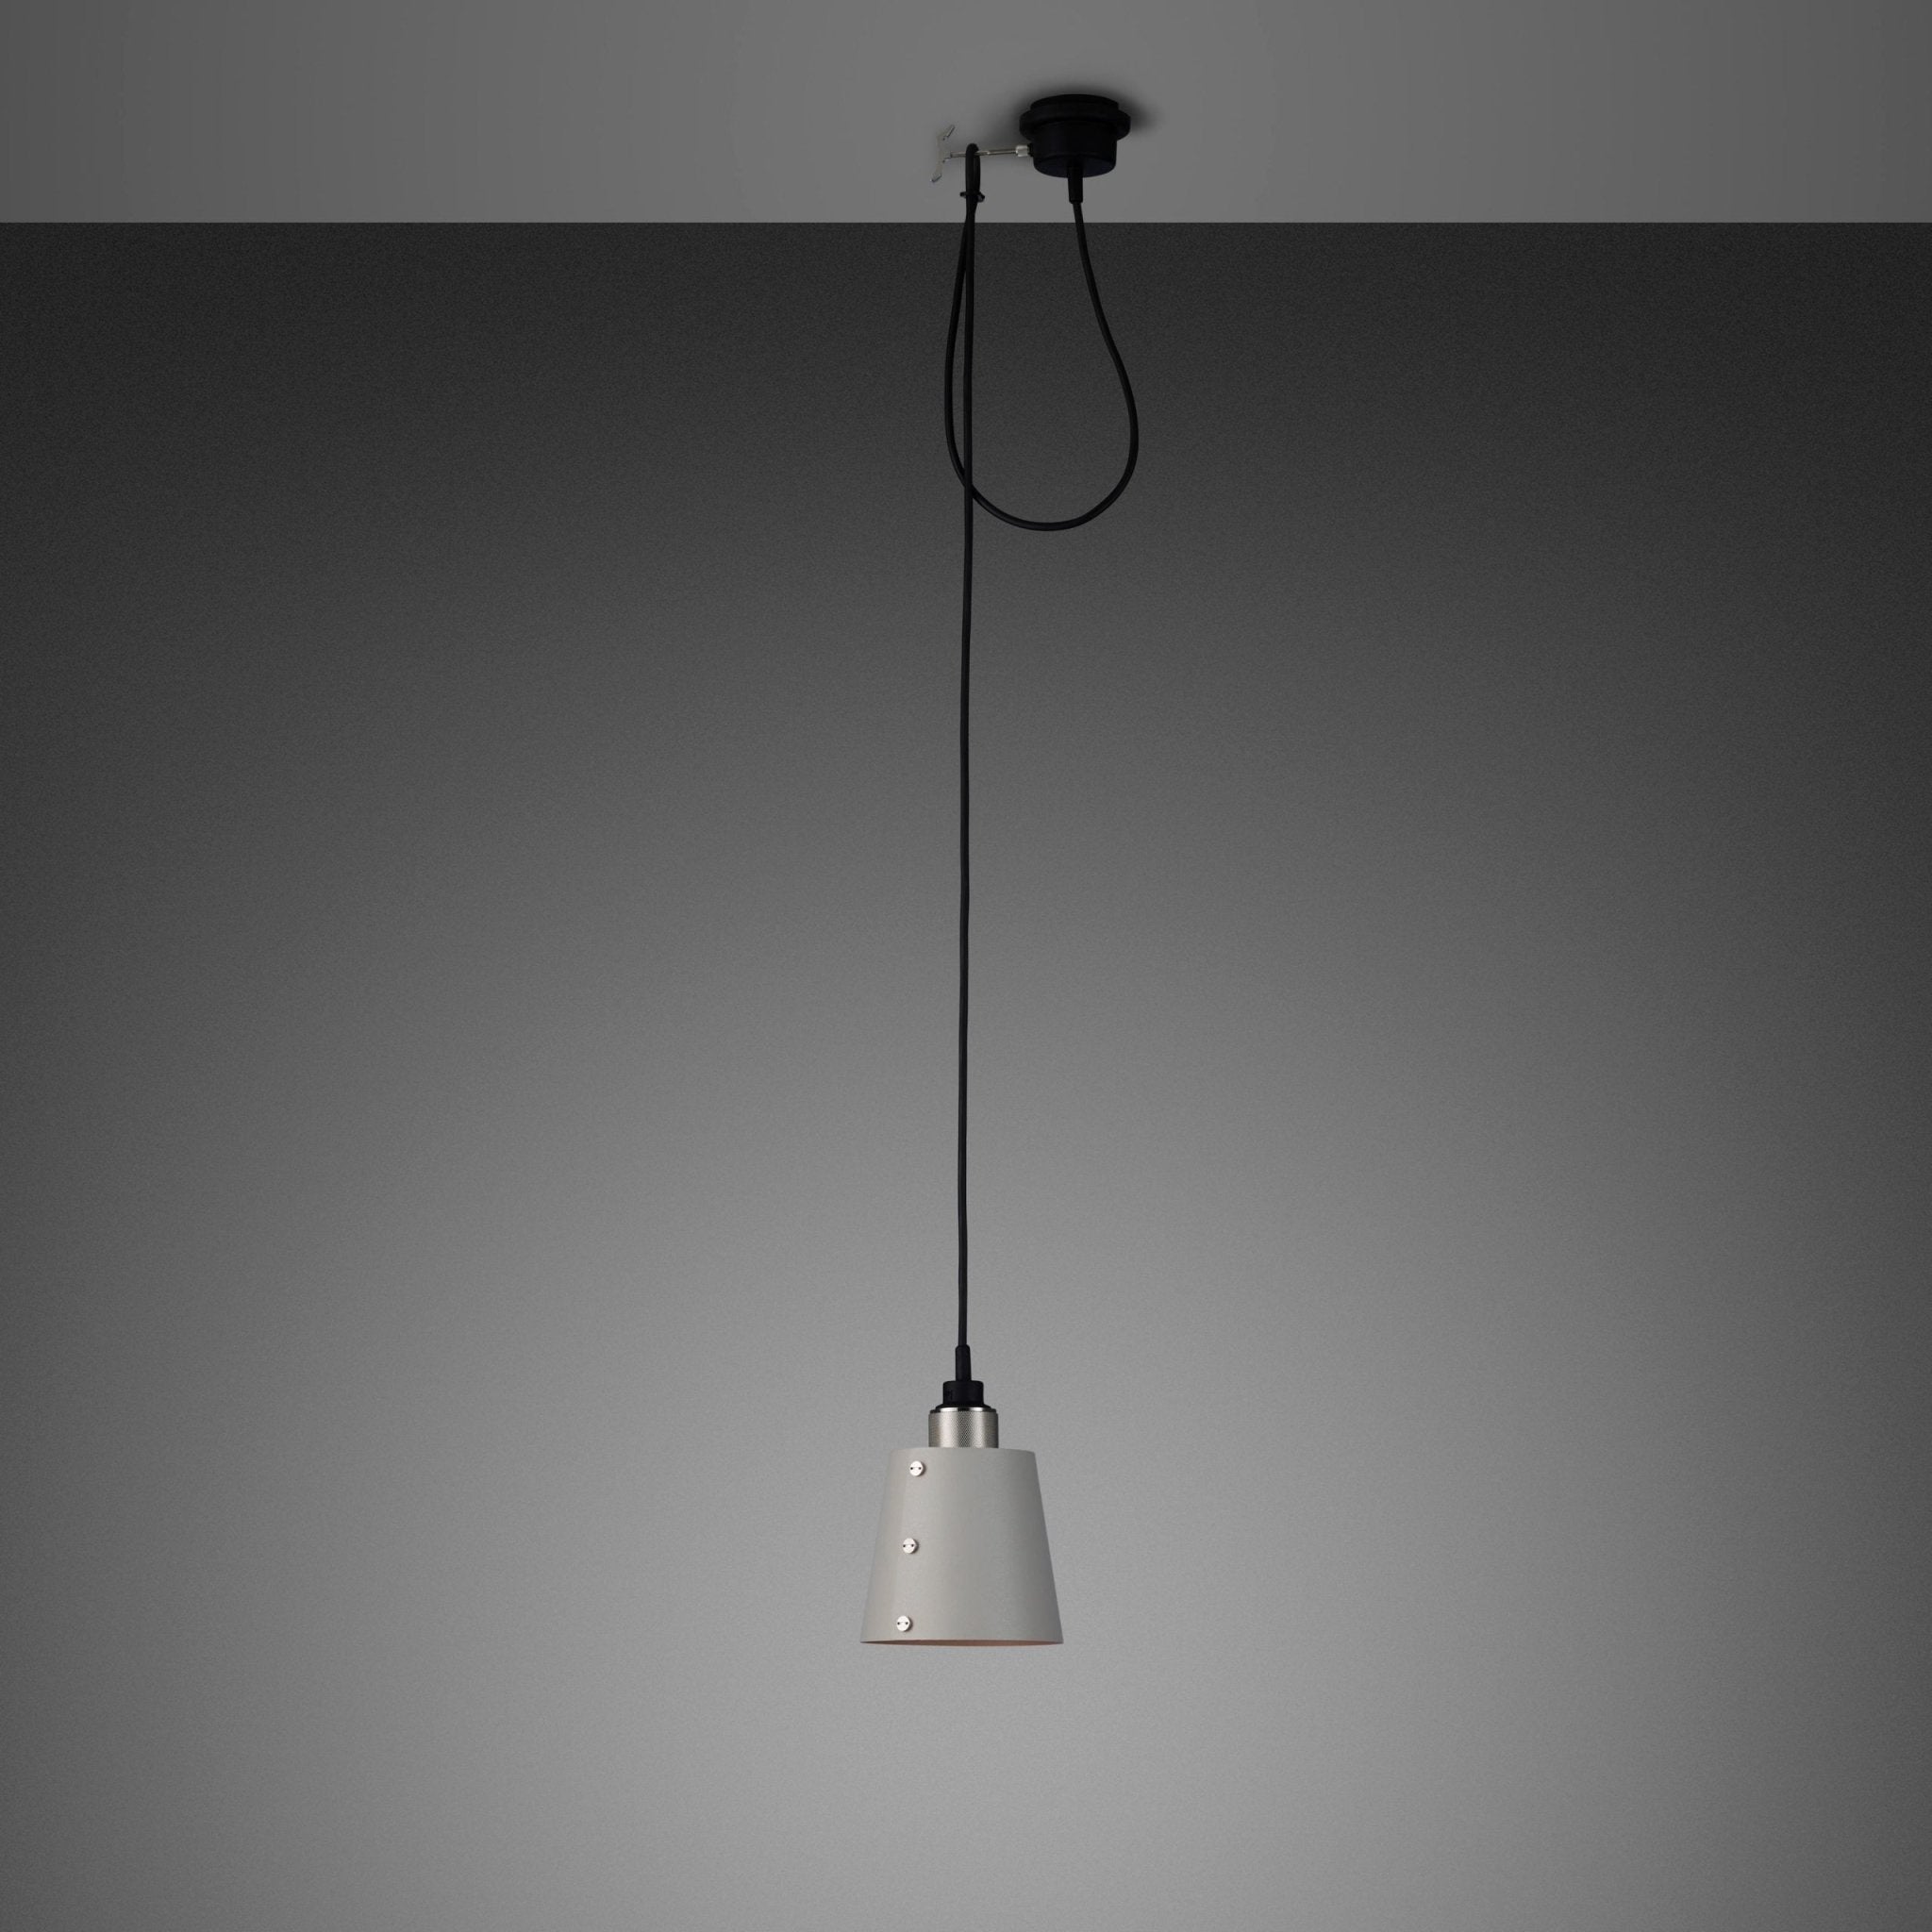 Buster and Punch - Hooked 1.0 / Klein Steen Shade 2.0m Hanglamp - KOOT